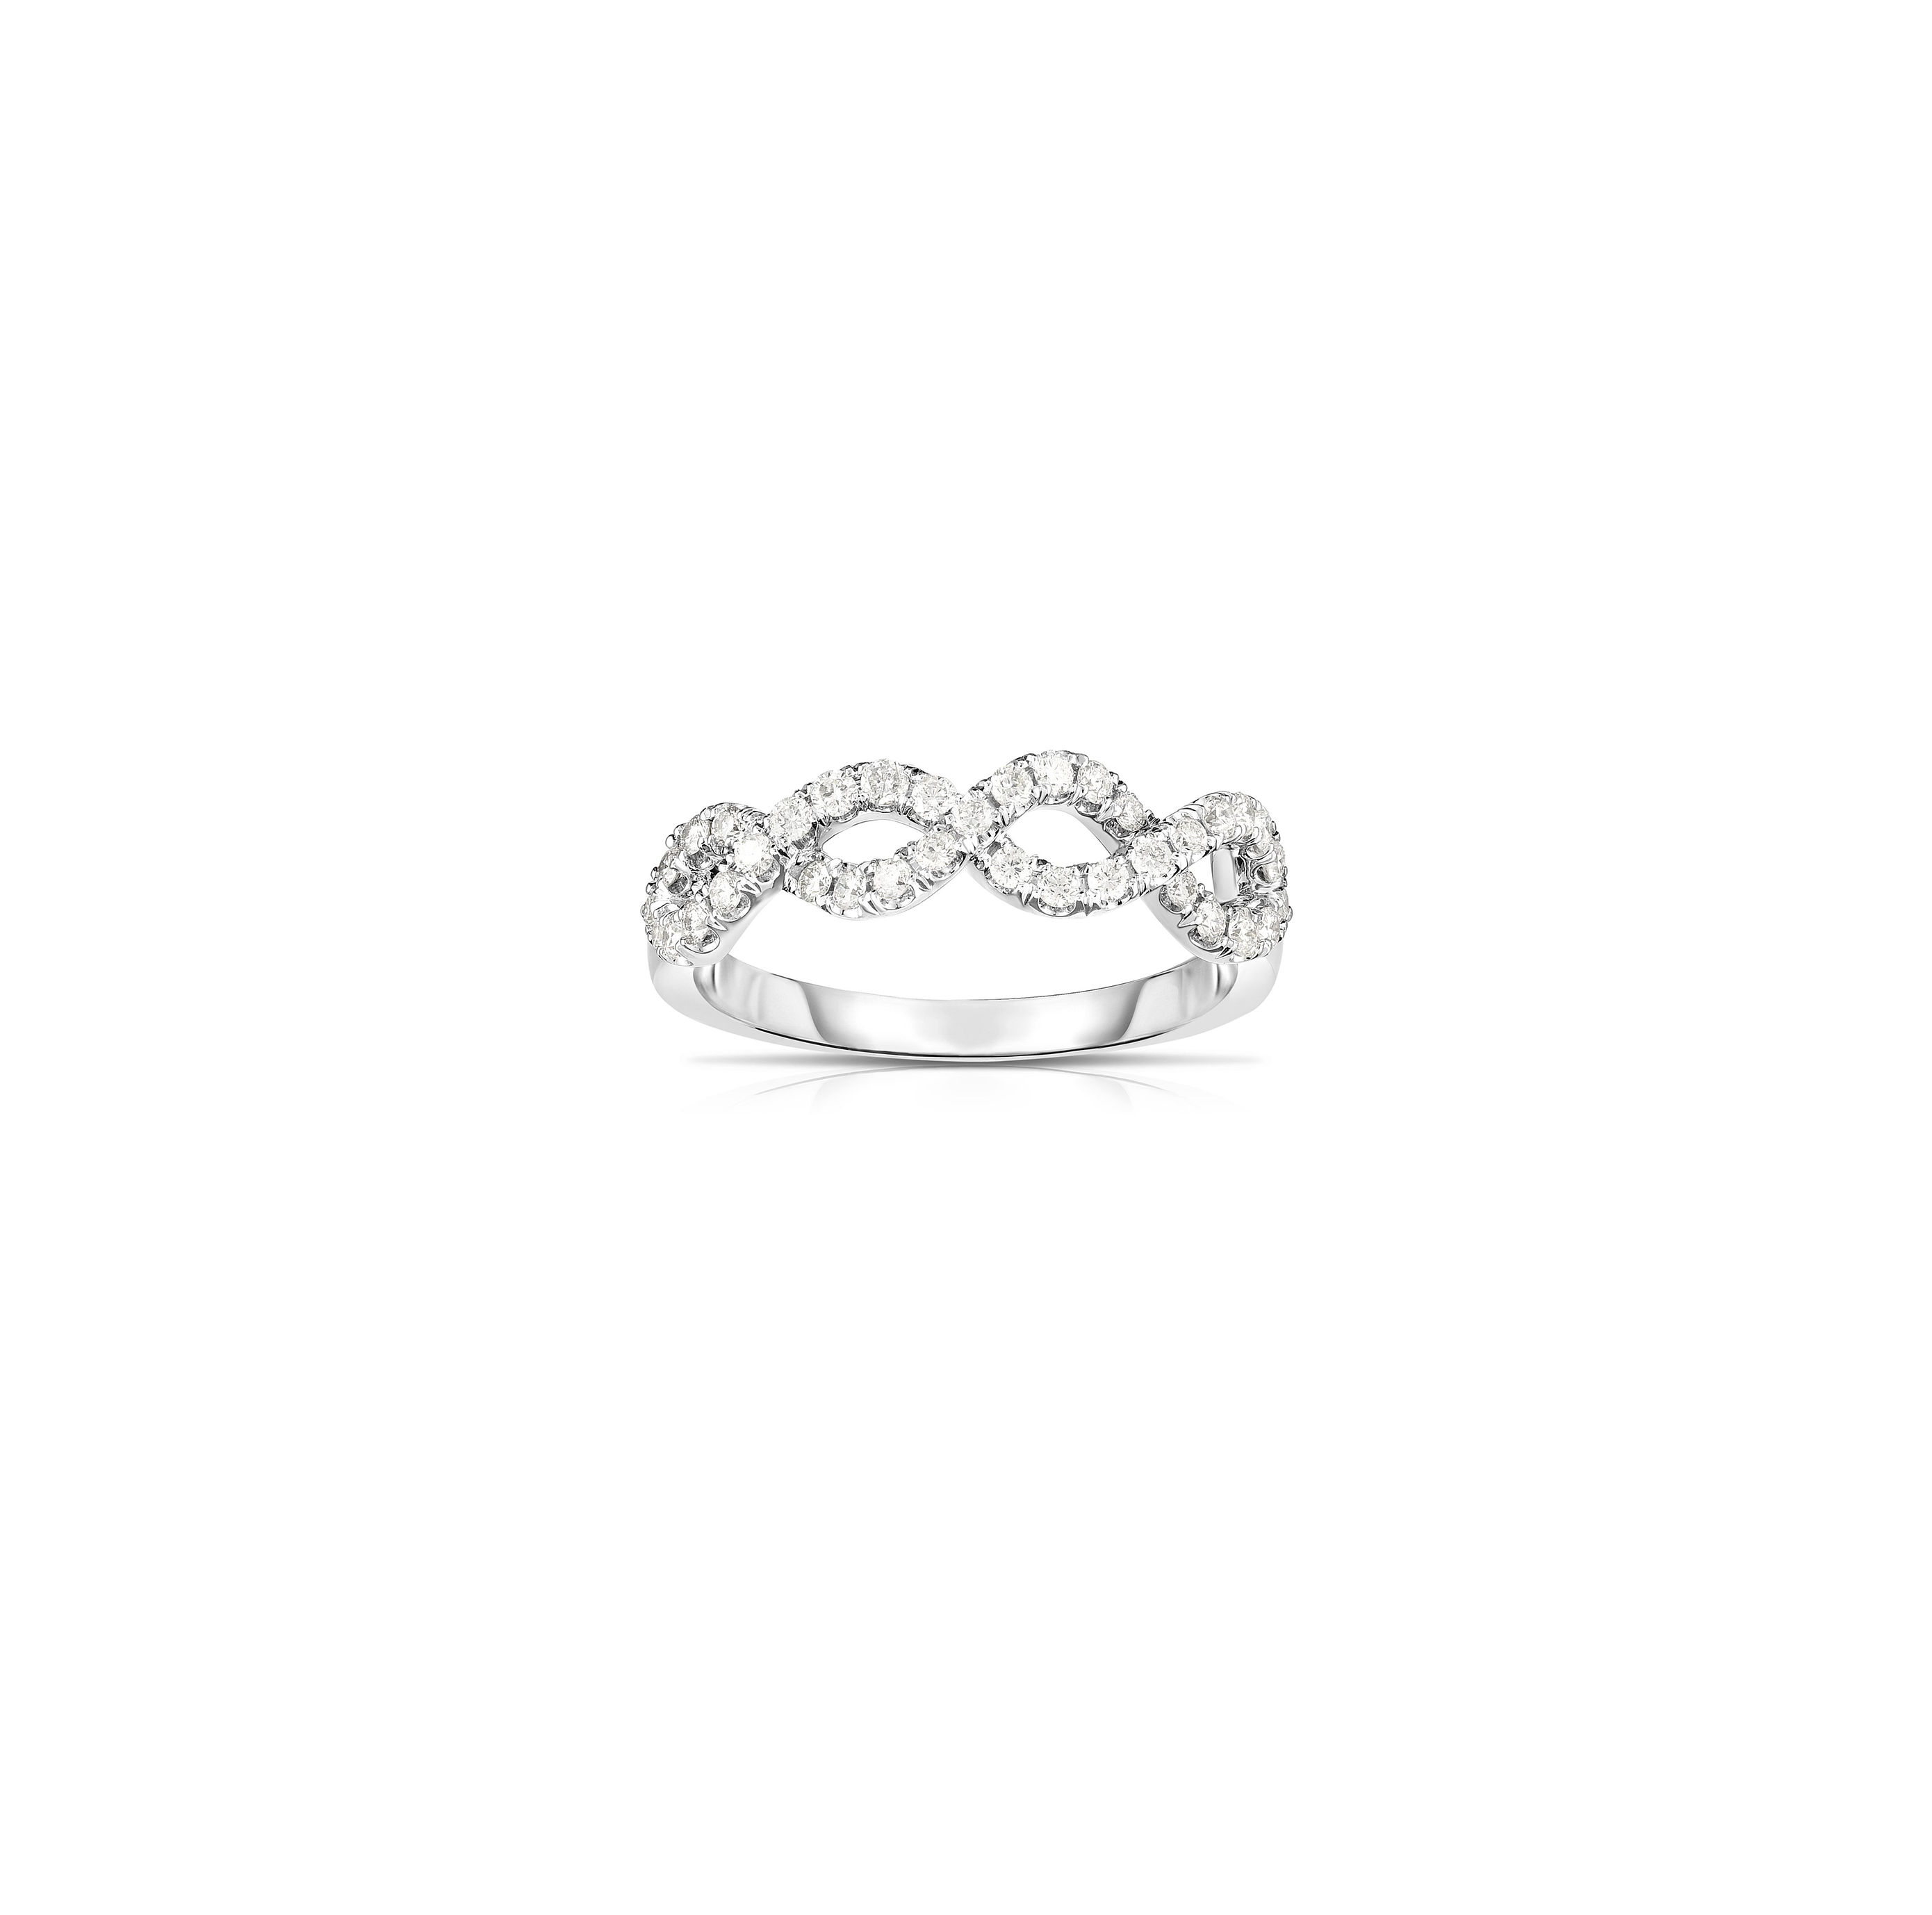 White Gold Pear Halo Engagement Ring, Infinity Twist Ring, 2 Carat Moi